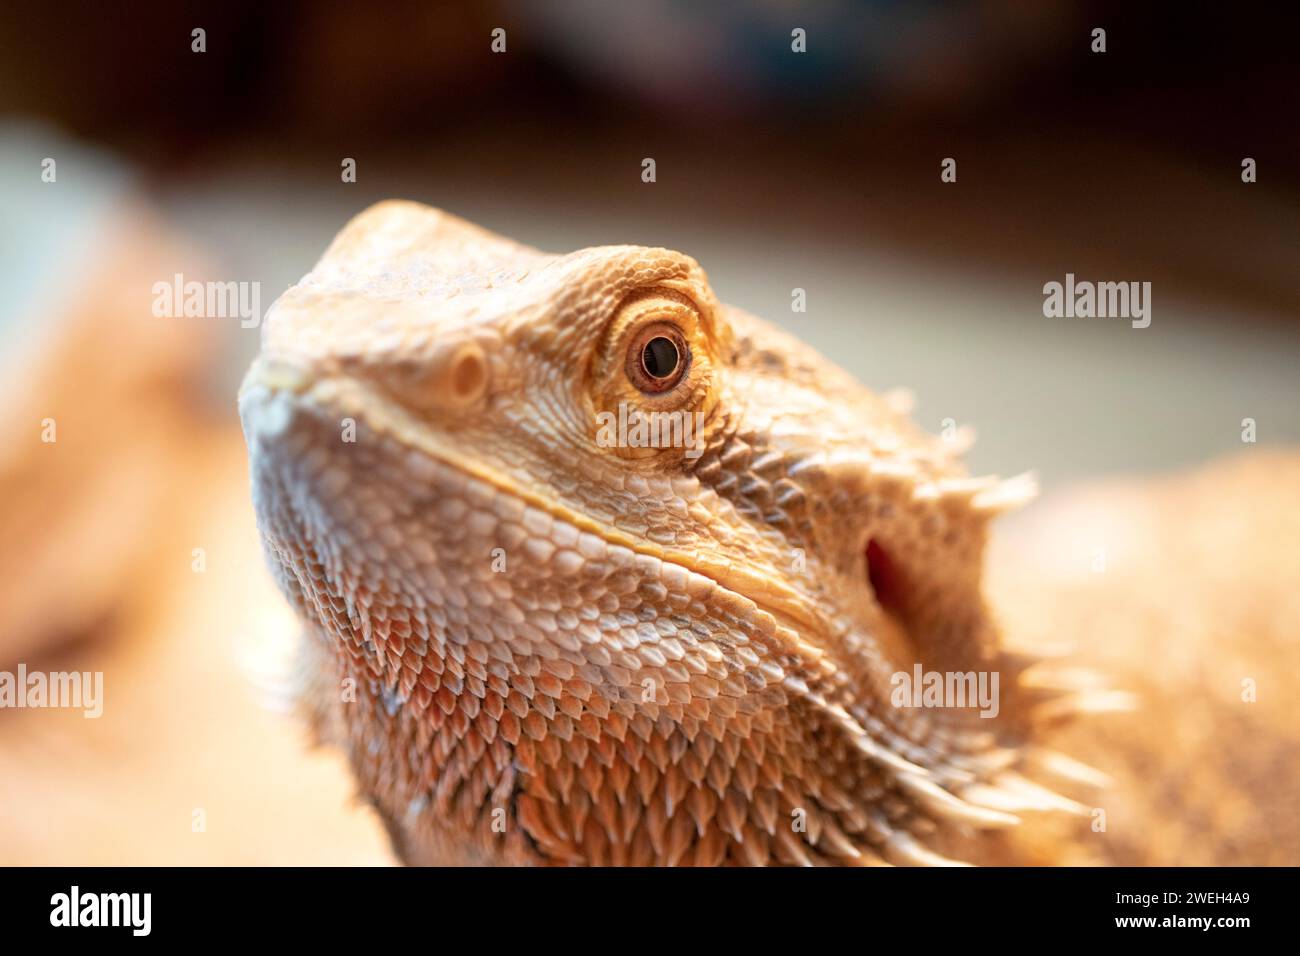 close-up of a bearded dragon's face, showing the eye and beard in clarity Stock Photo